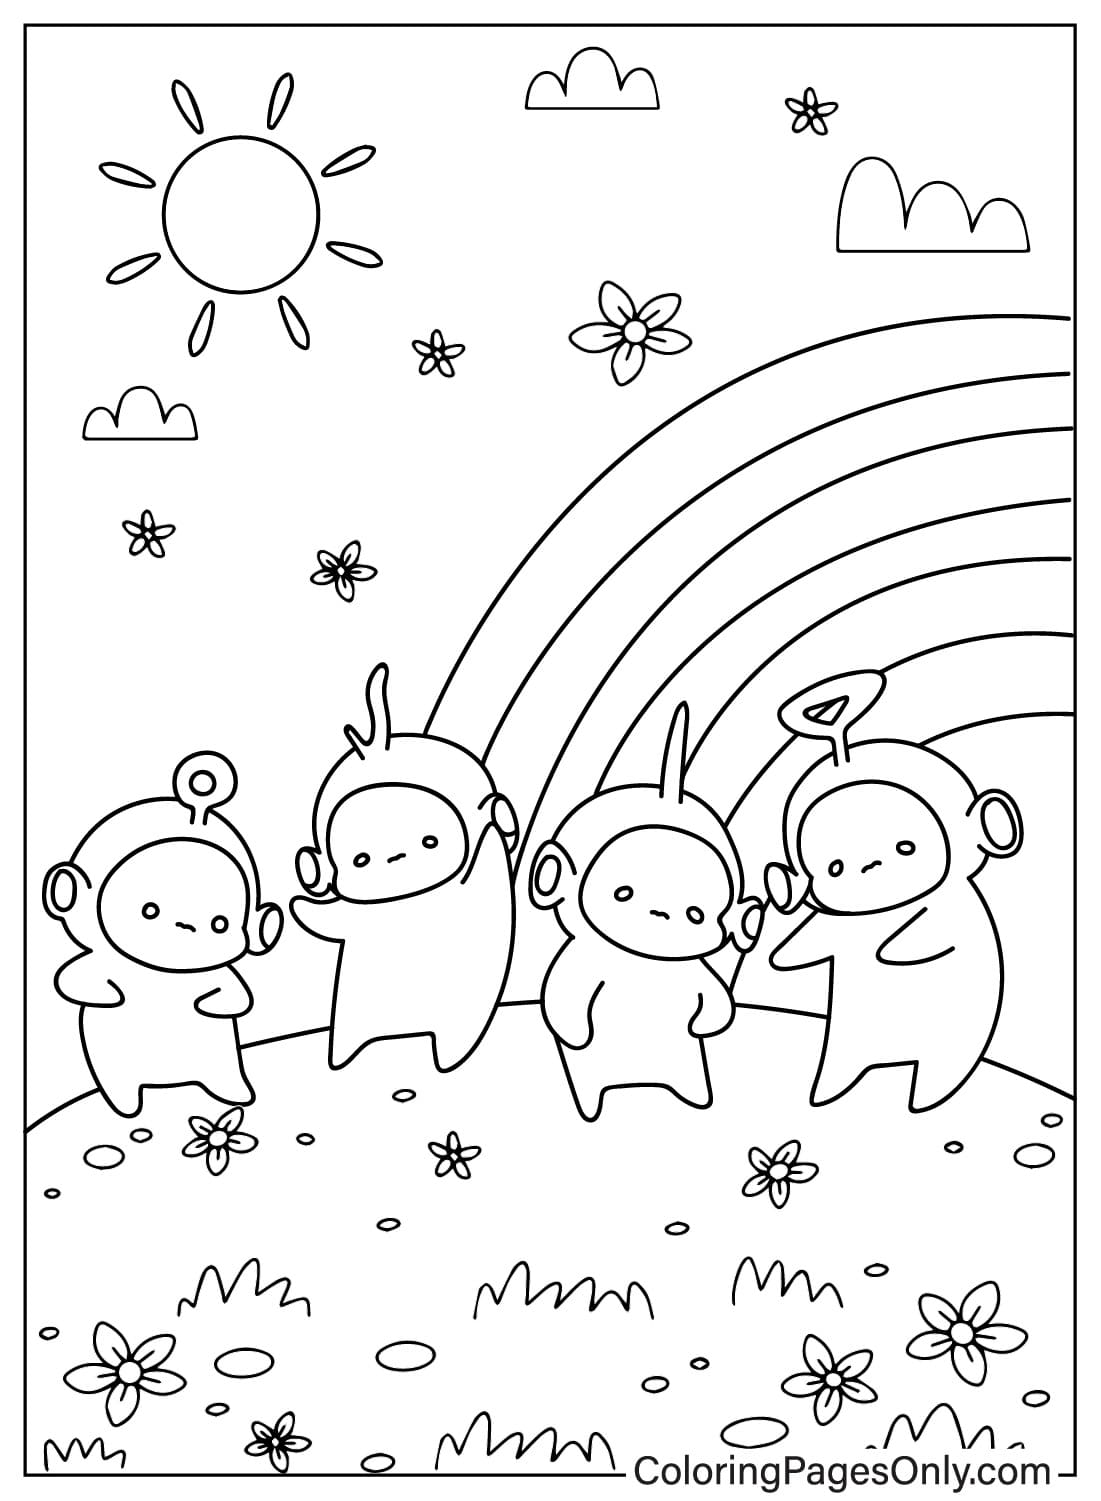 Teletubbies – WildBrain Free Coloring Page from Teletubbies - WildBrain